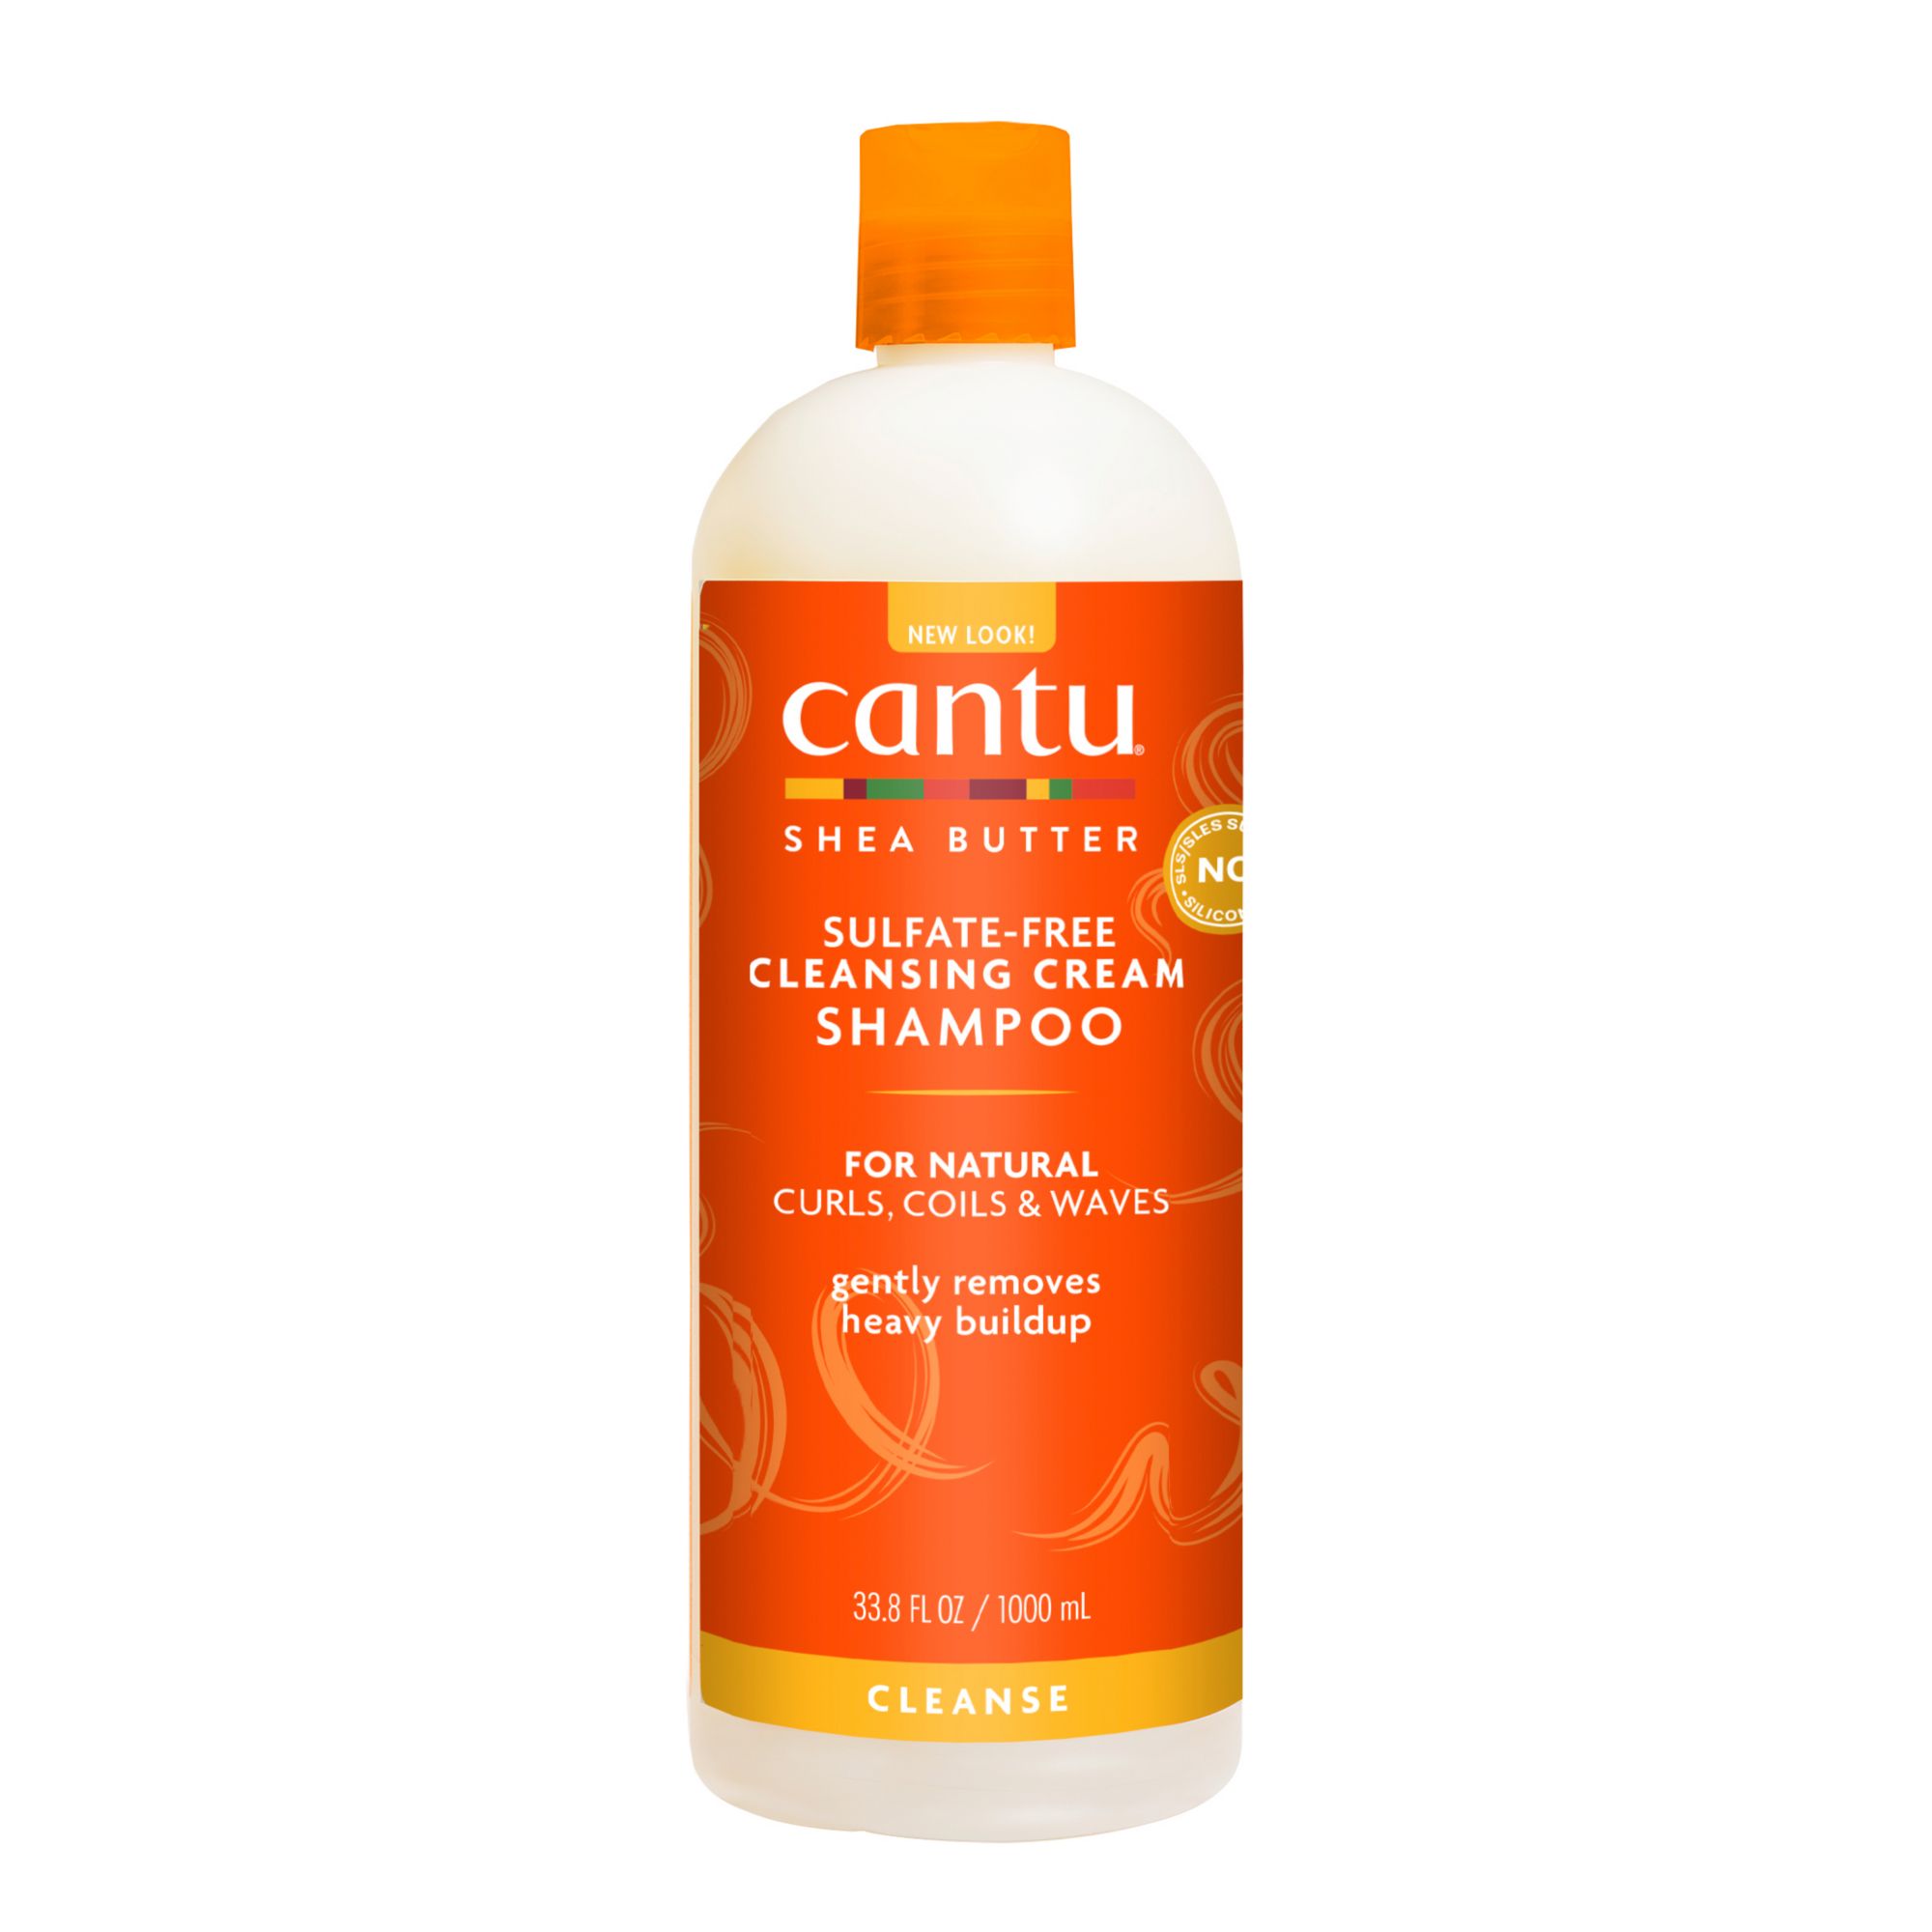 Cantu Shea Butter for Natural Hair Sulfate-Free Cleansing Cream Shampoo, 1 Liter